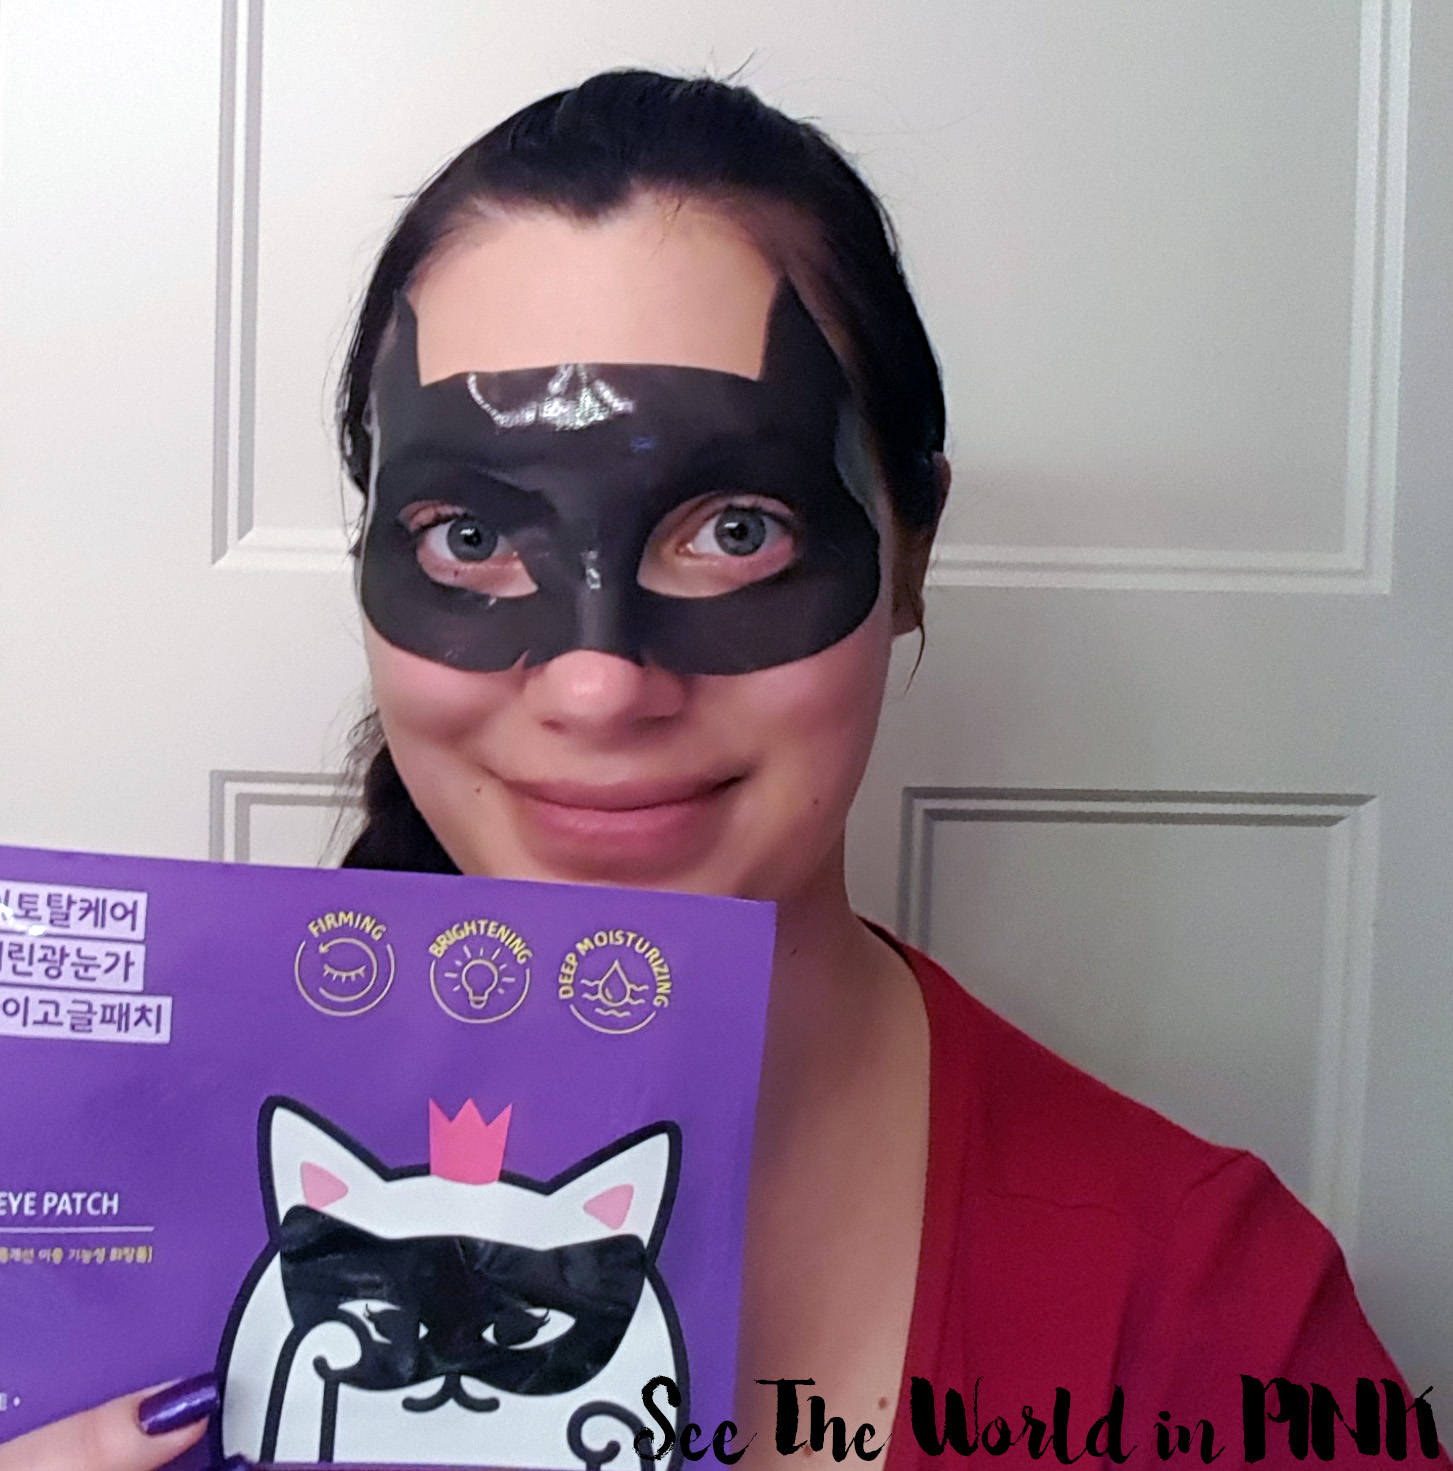 Mask Wednesday - Etude House Black Hydrogel Eye Patch (Look Like A Kitty Mask!) Try-on and Review! 